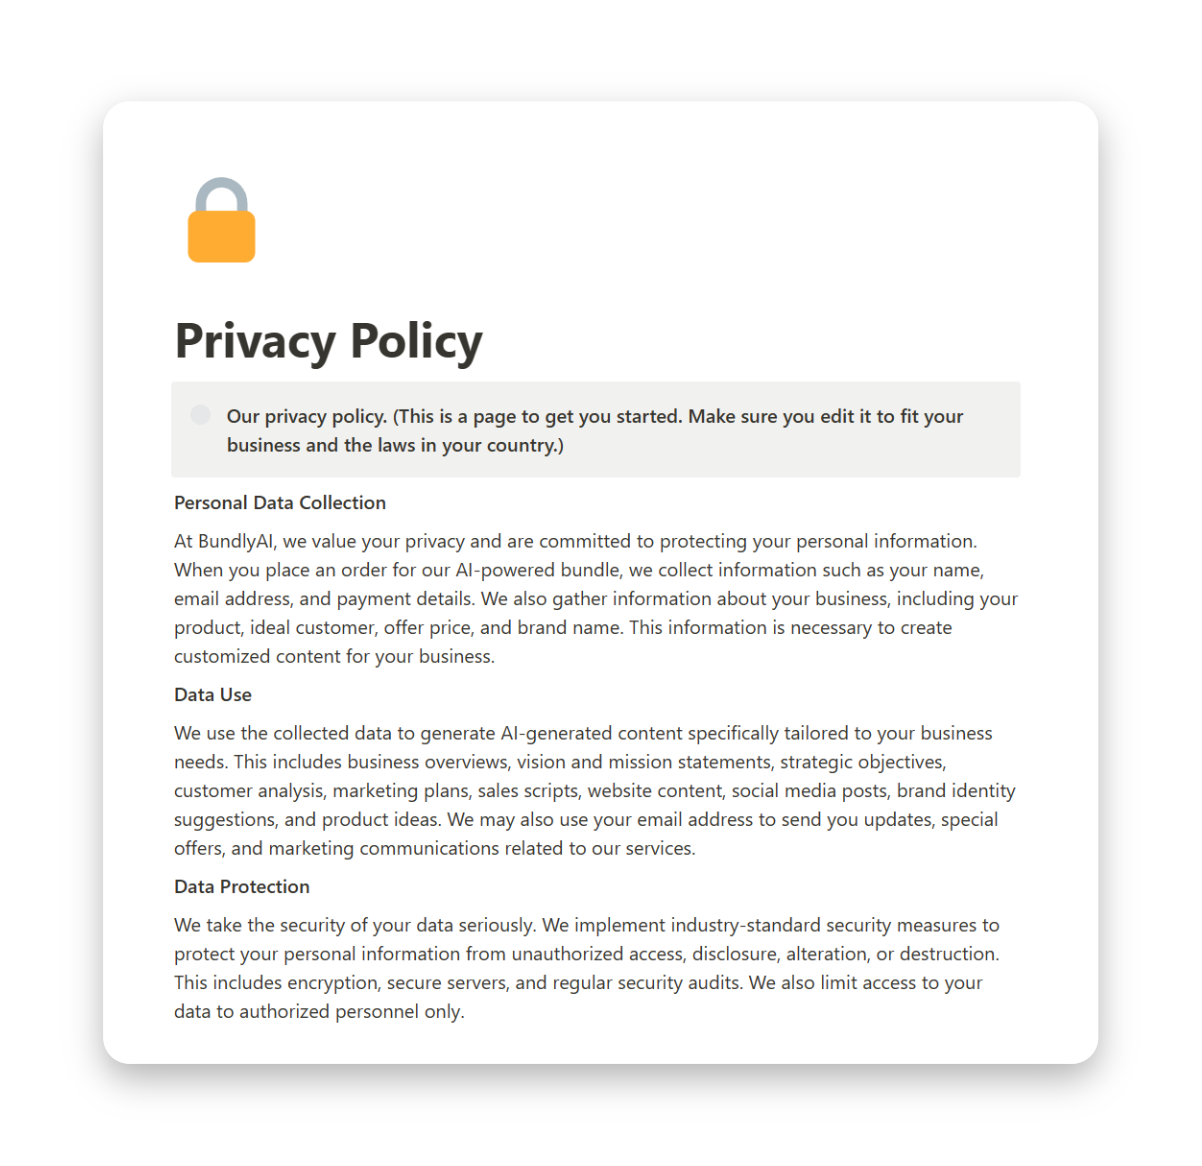 A screenshot of the 'Privacy Policy' page on BundlyAI, highlighting user data protection, usage, rights, and compliance with legal standards.